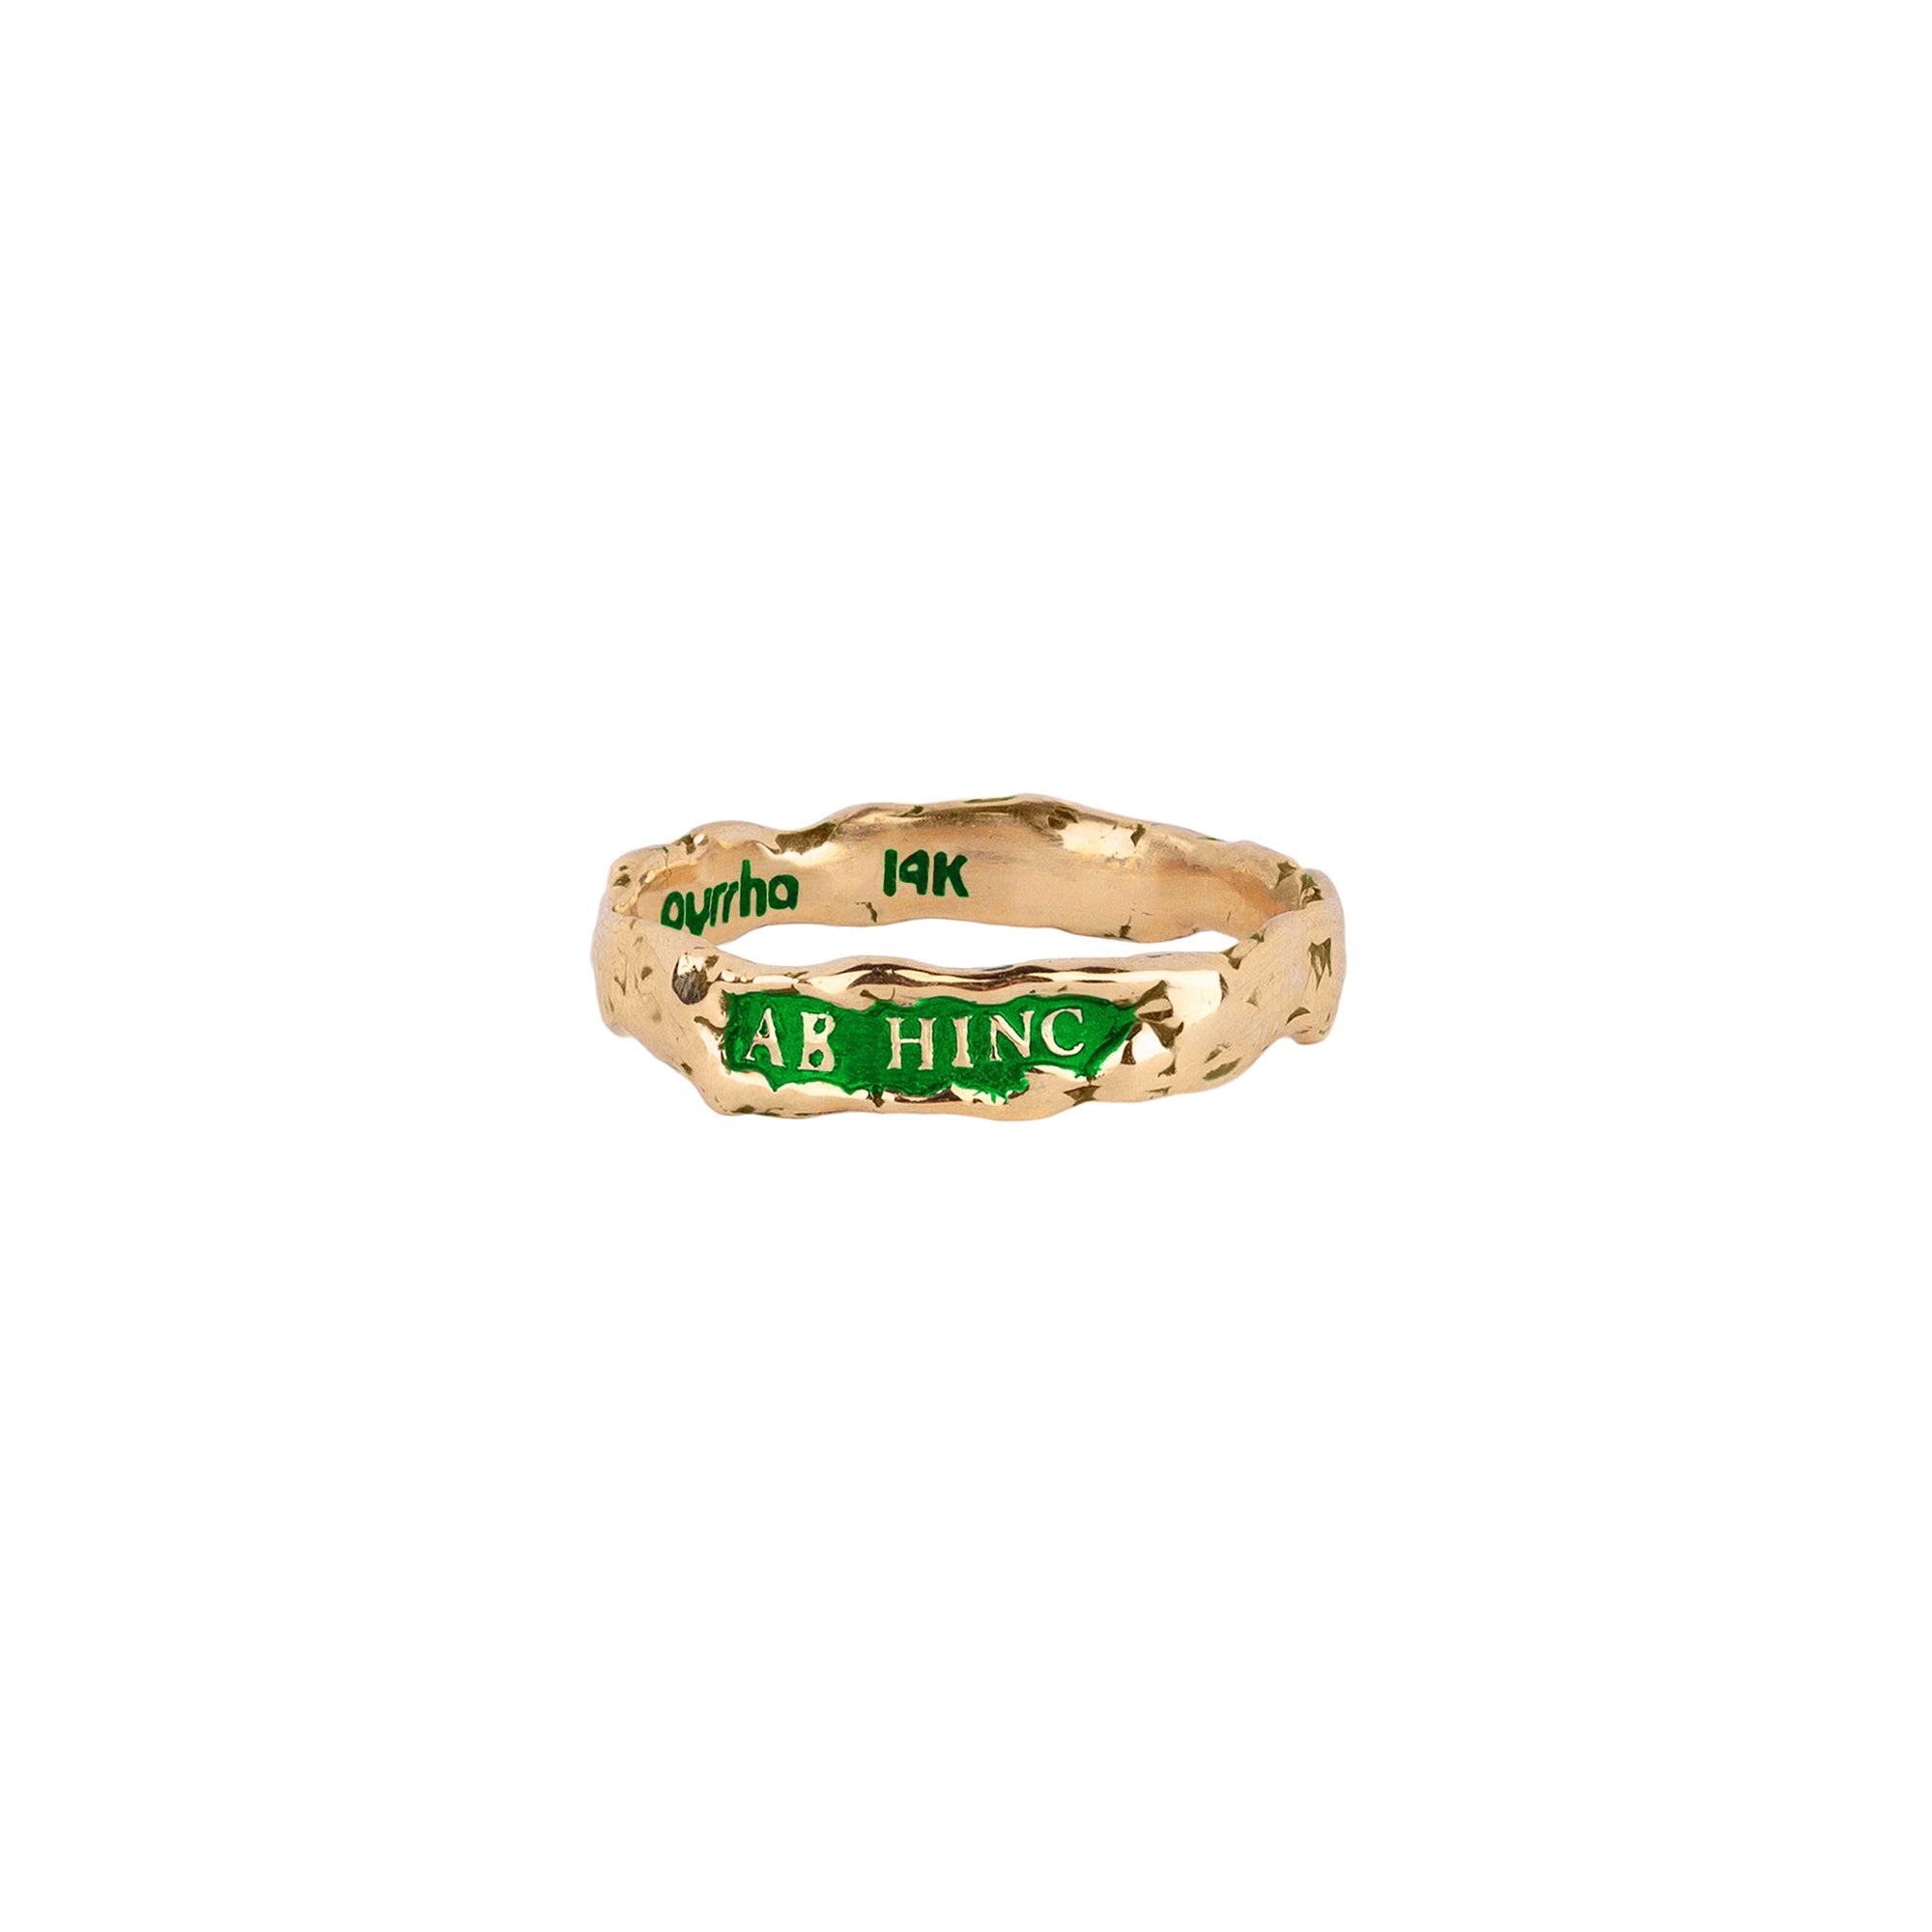 From Here On 14K Gold Narrow Texture Band Ring - True Colors